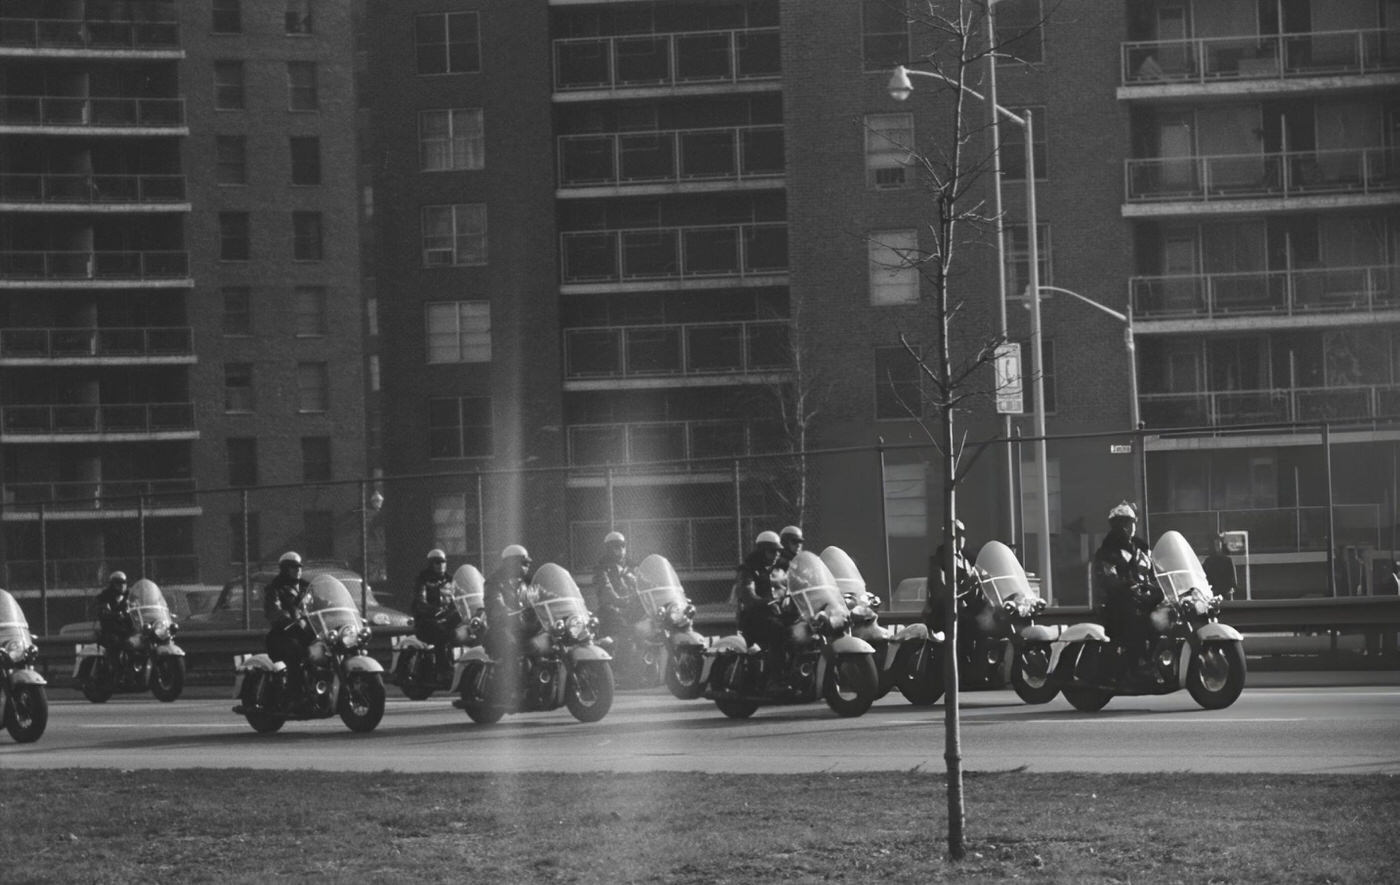 Police Motorcycles As Part Of A Heavy Security Presence As Us President Lyndon B. Johnson Passed Through Queens On His Way To Attend The Funeral Of Former New York Governor Herbert H. Lehman, 1963.